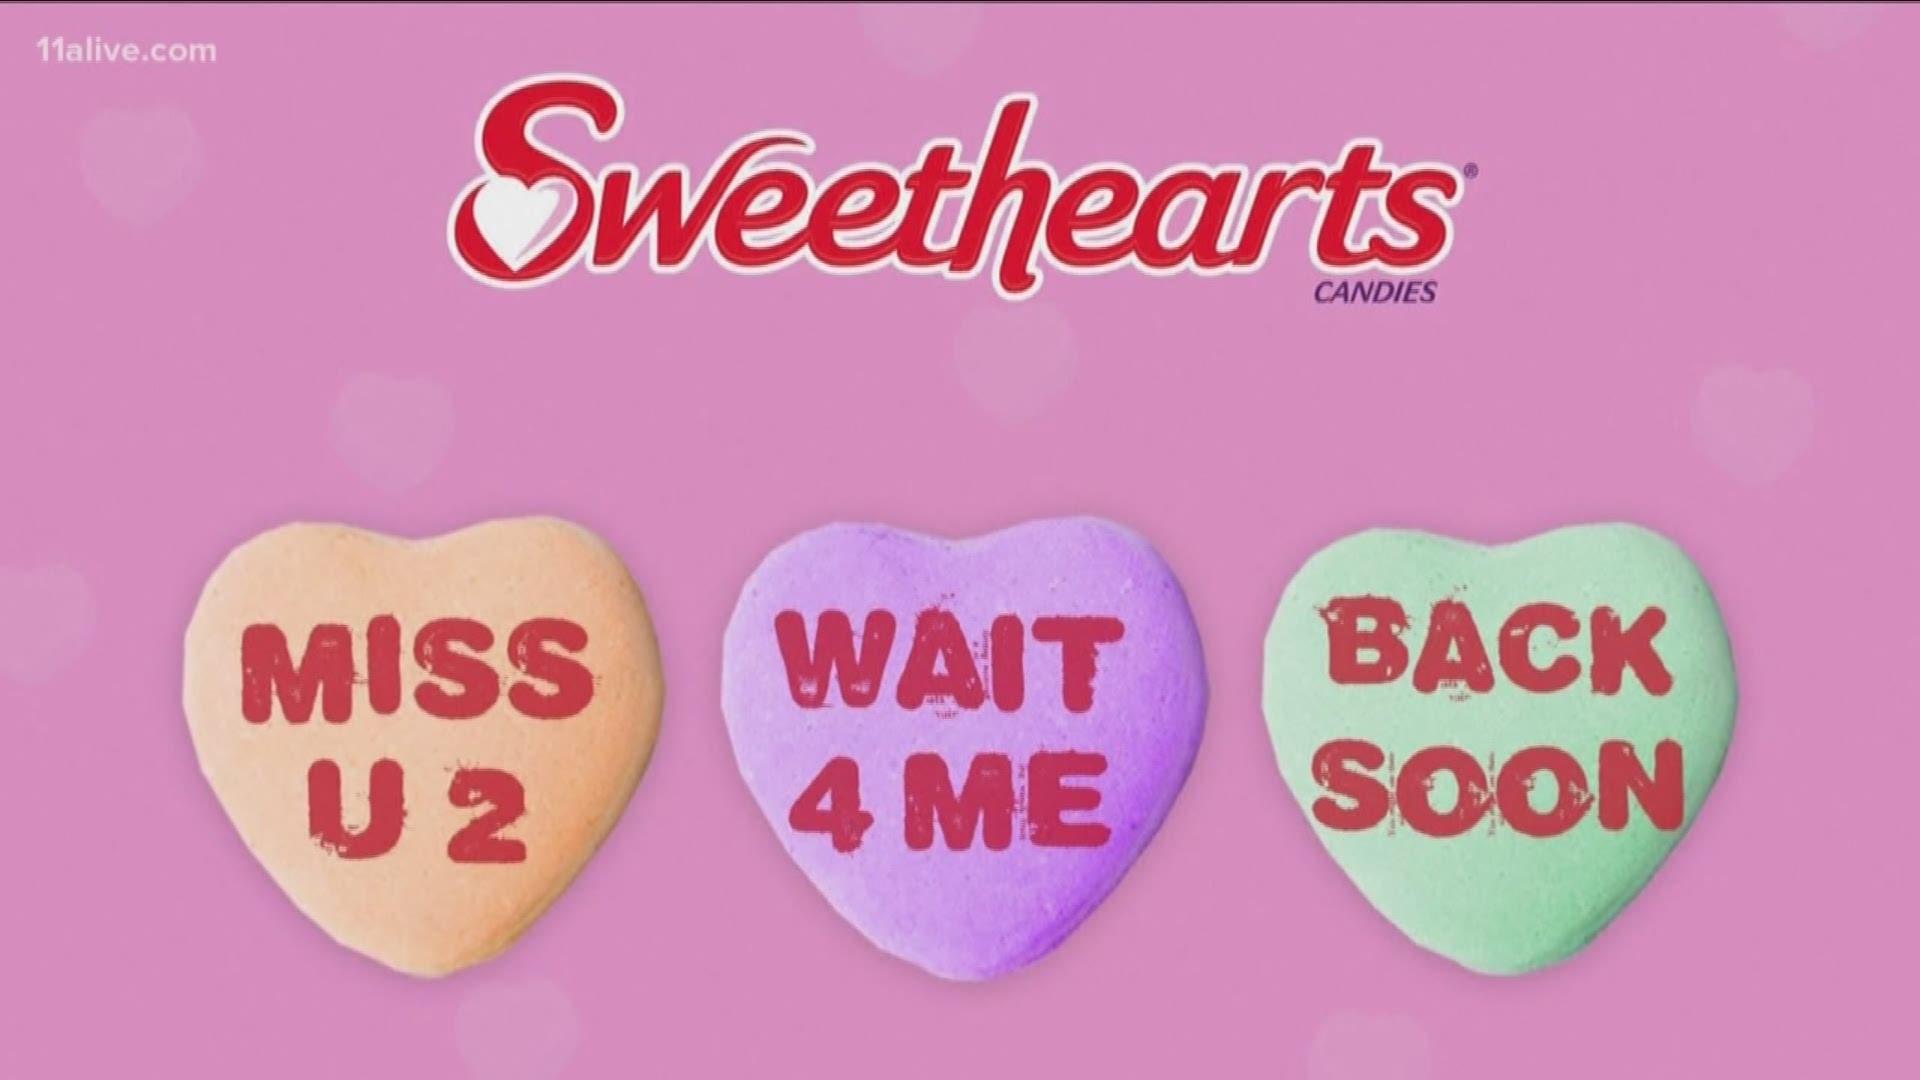 The Sweethearts Company has a special message for its fans.